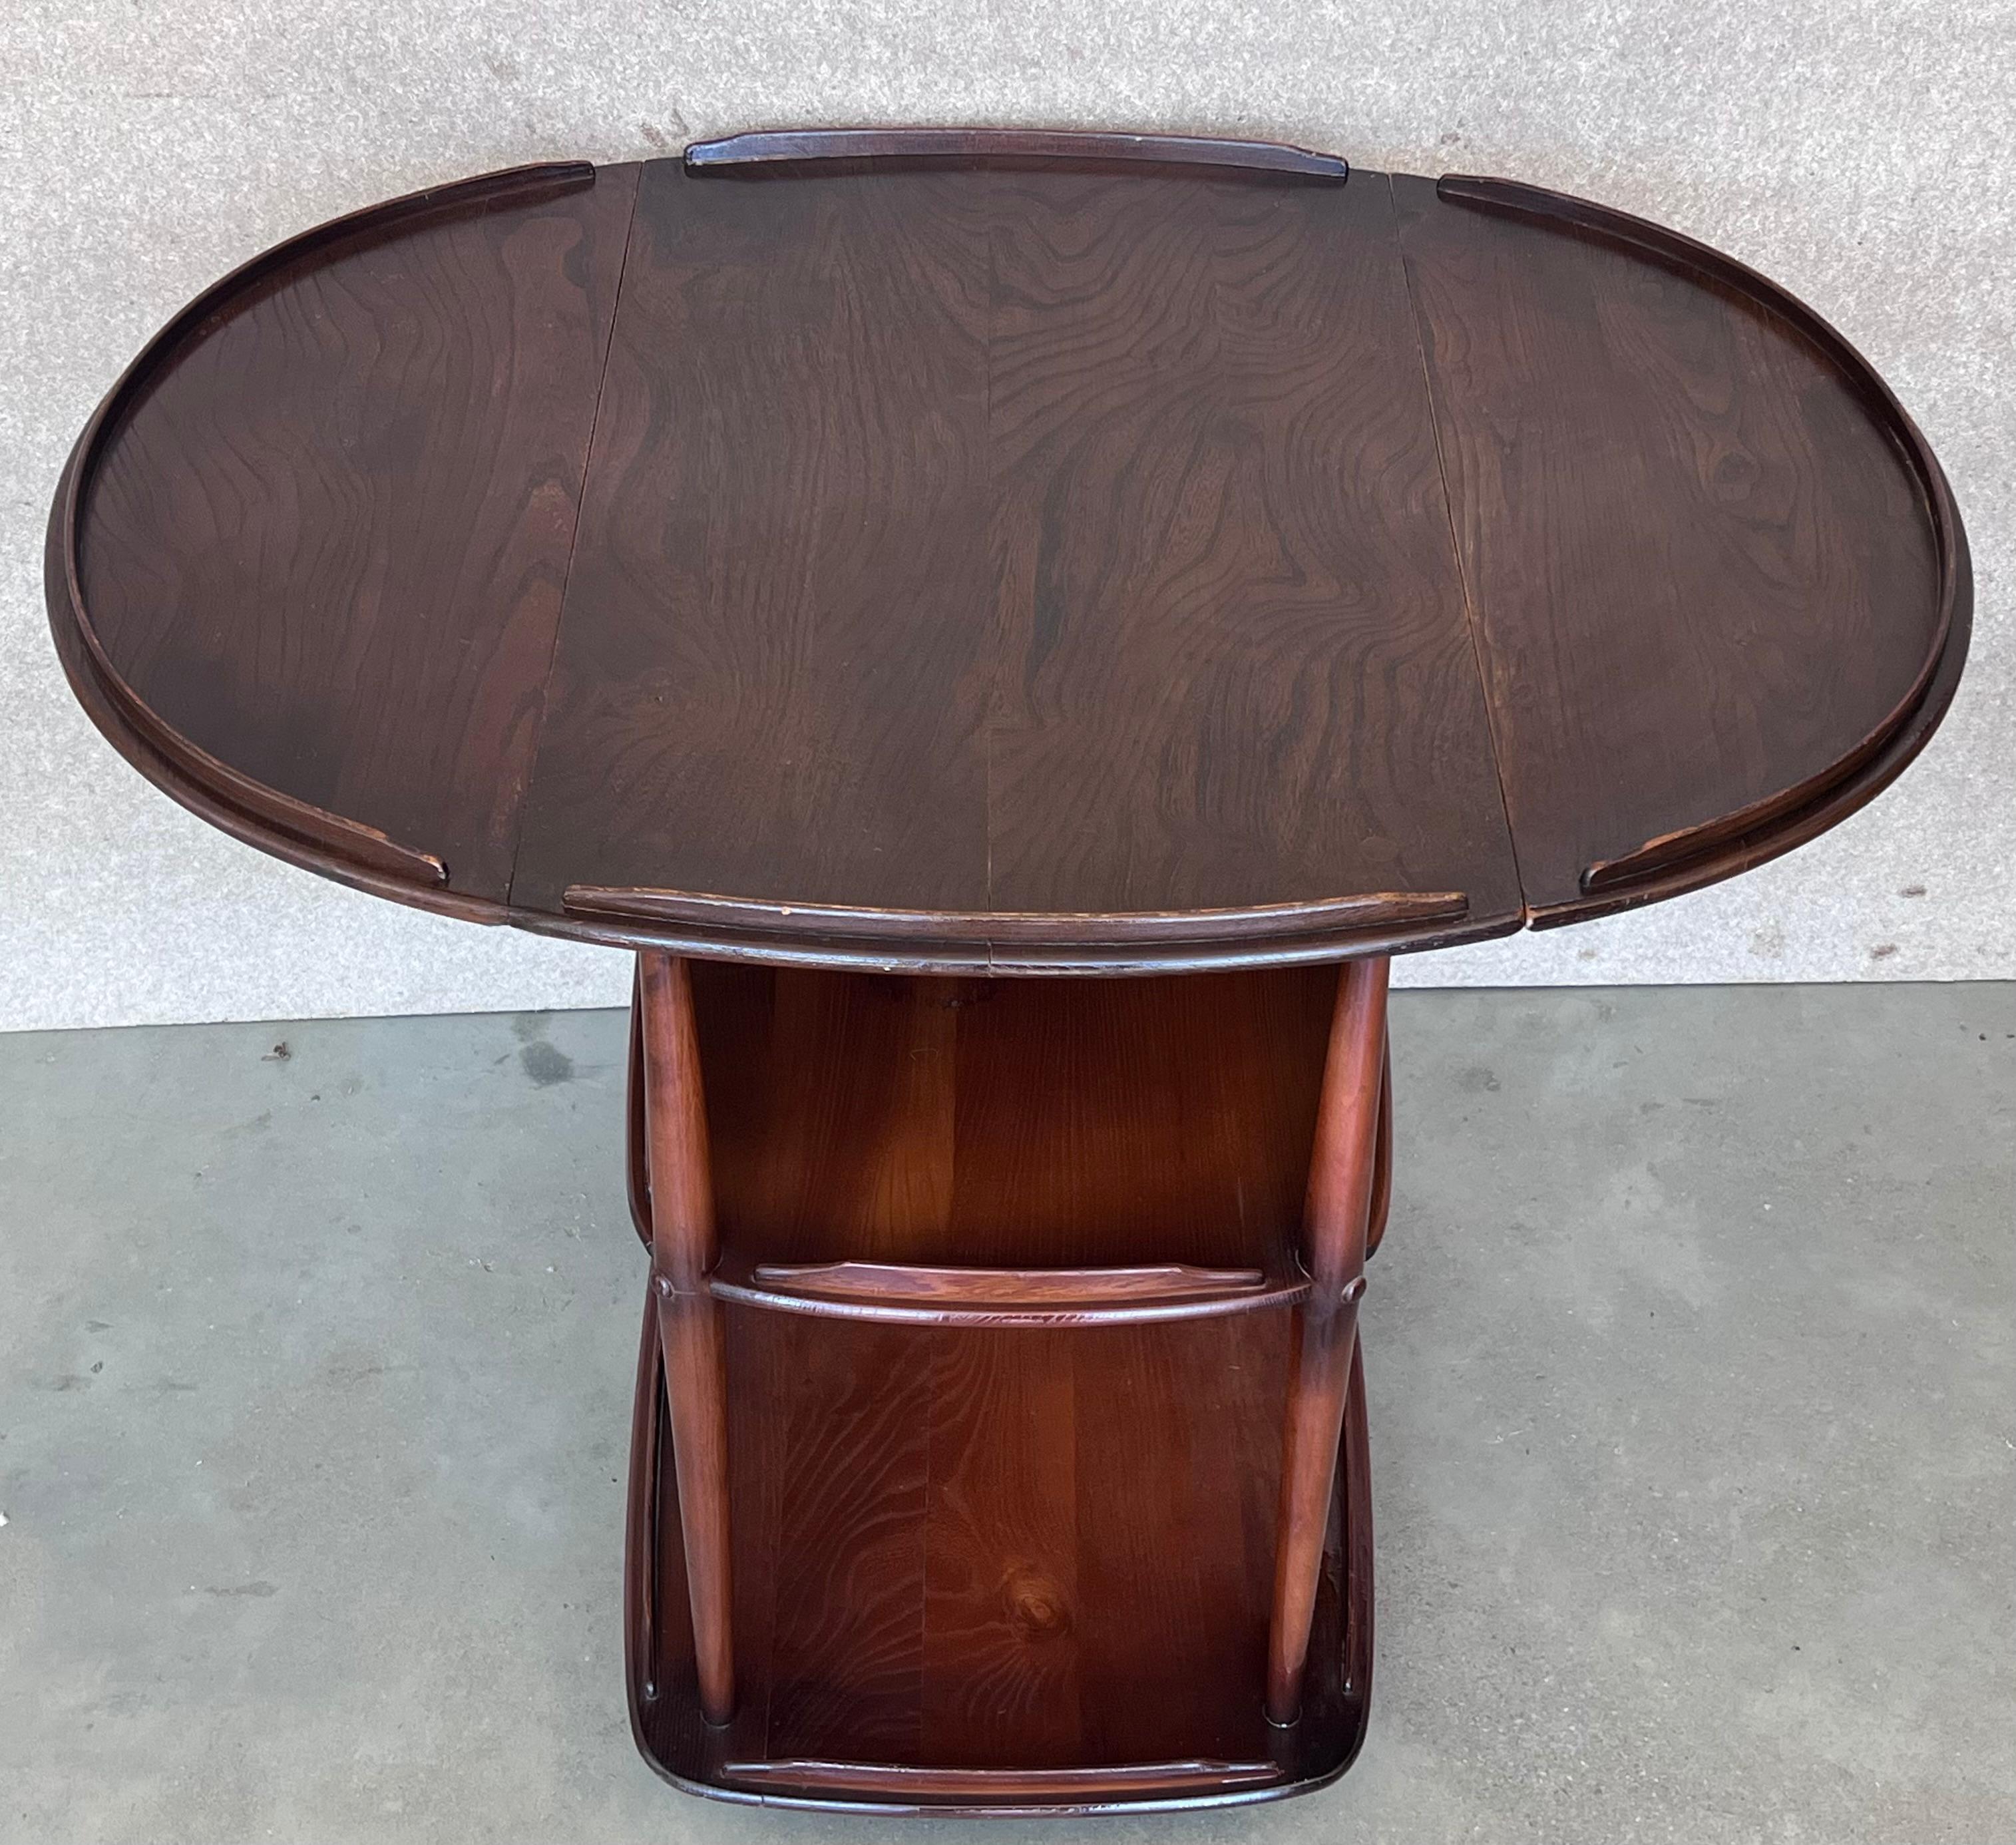 Very cool serving cart made from walnut with three trays. The two leafs are easily and quickly folding and the cart is convertible in a functional coffee tea or table that you love it. 
It has wheels that works perfectly.
The piece works perfectly